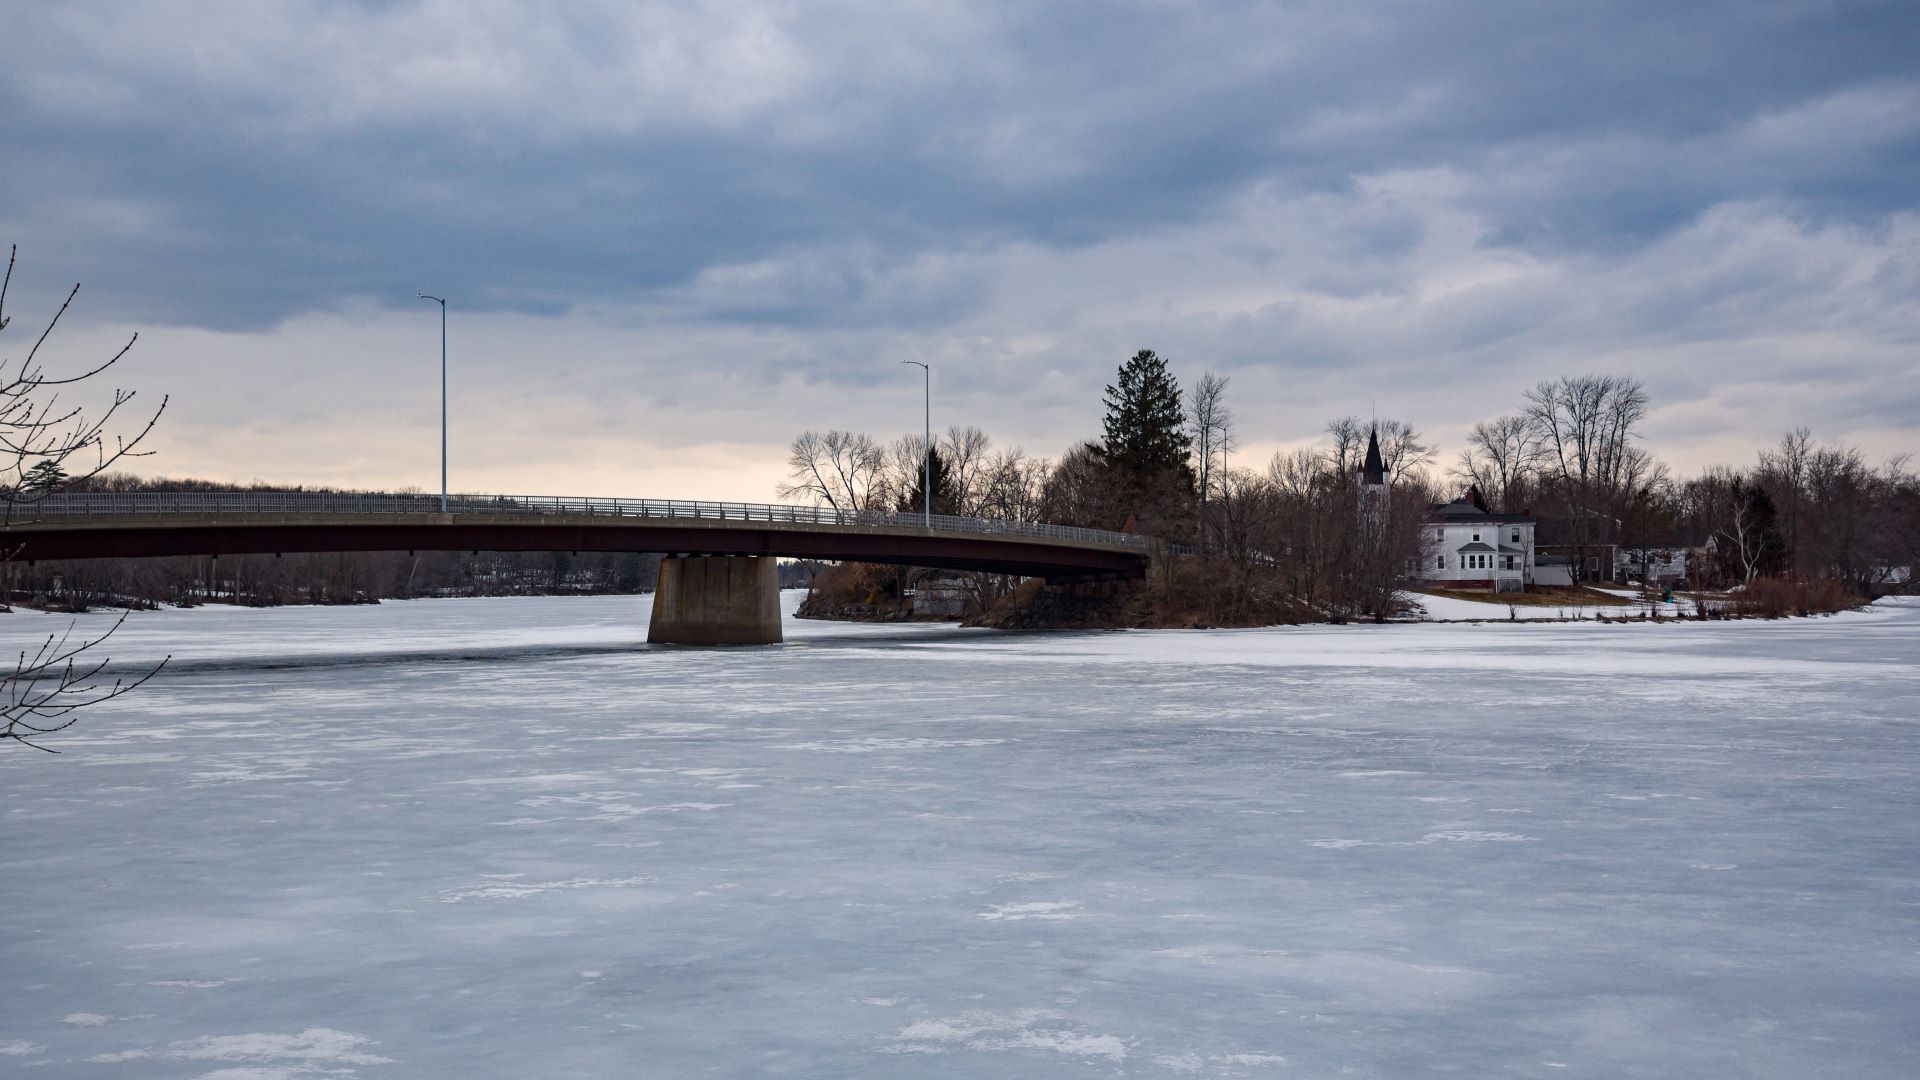 A bridge hovers over a frozen body of water.